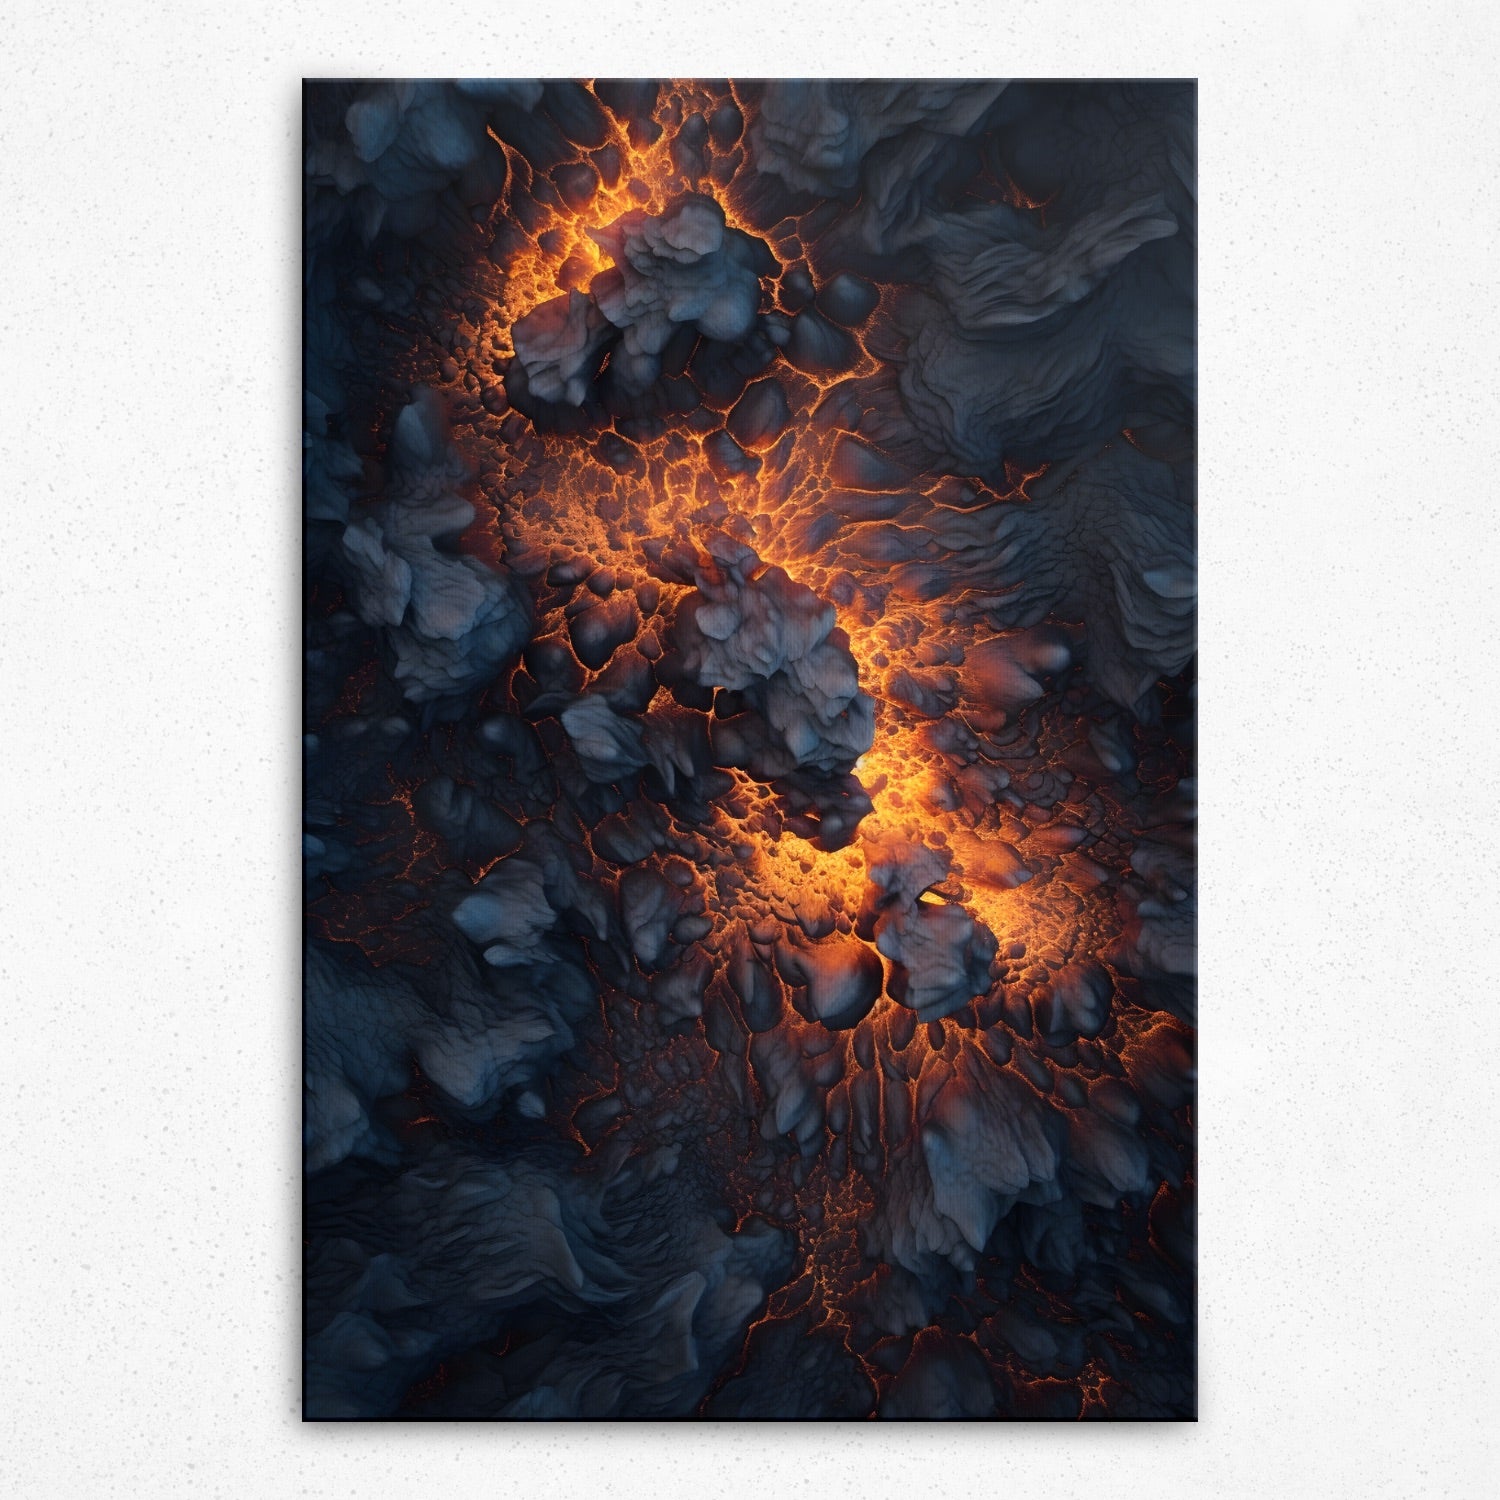 Residual Fire (Poster)